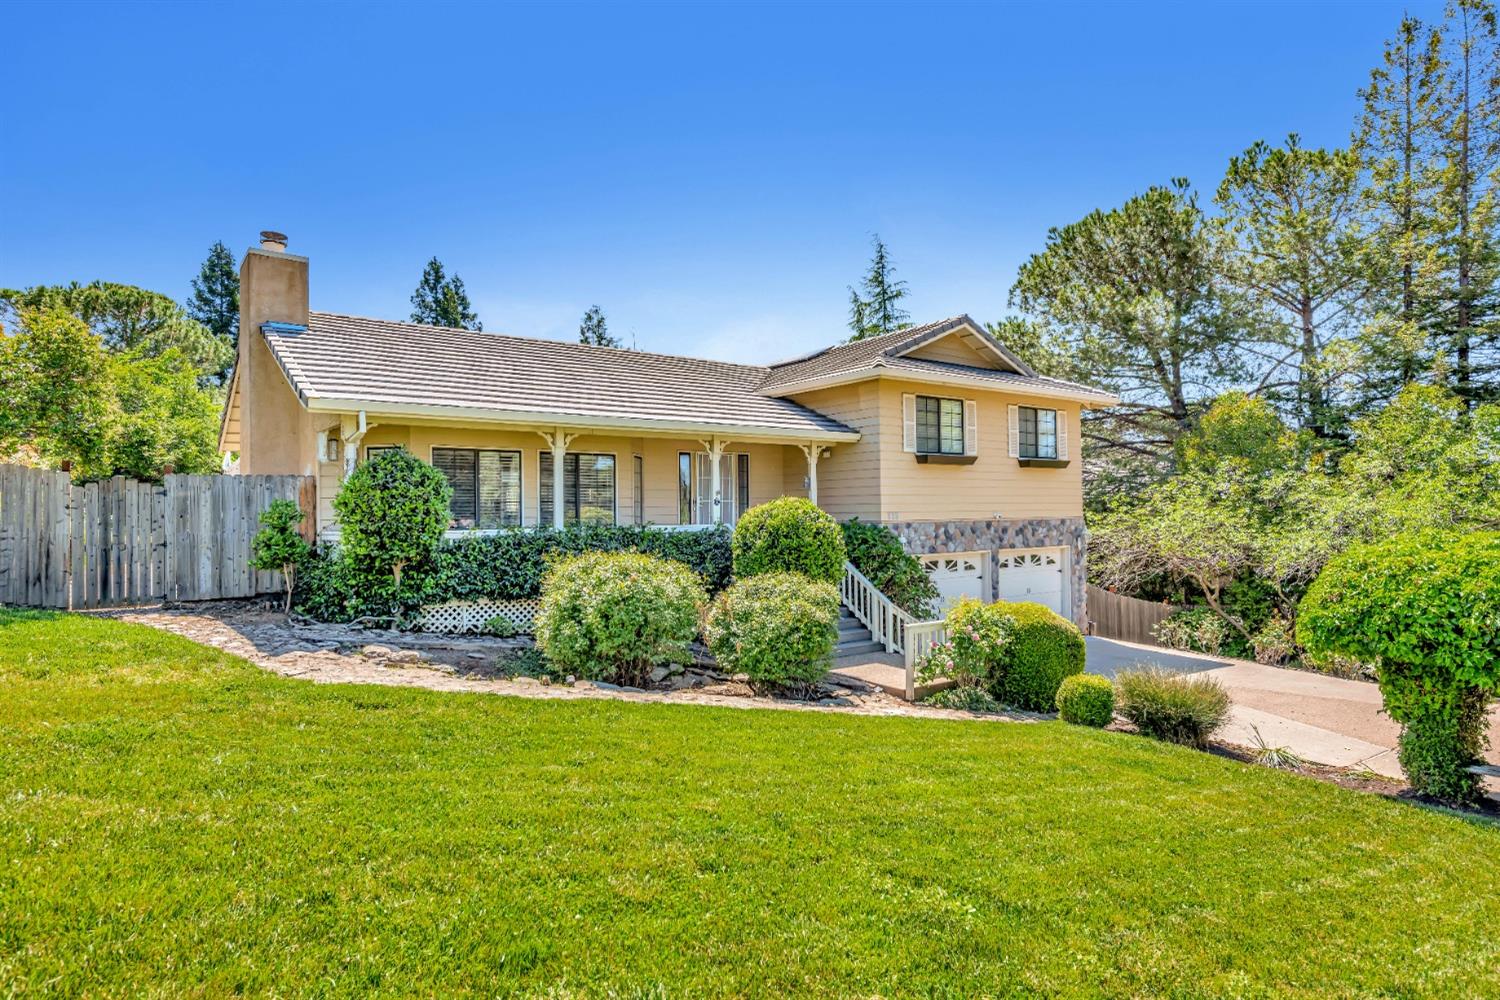 Photo of 538 Silver Rd in Valley Springs, CA